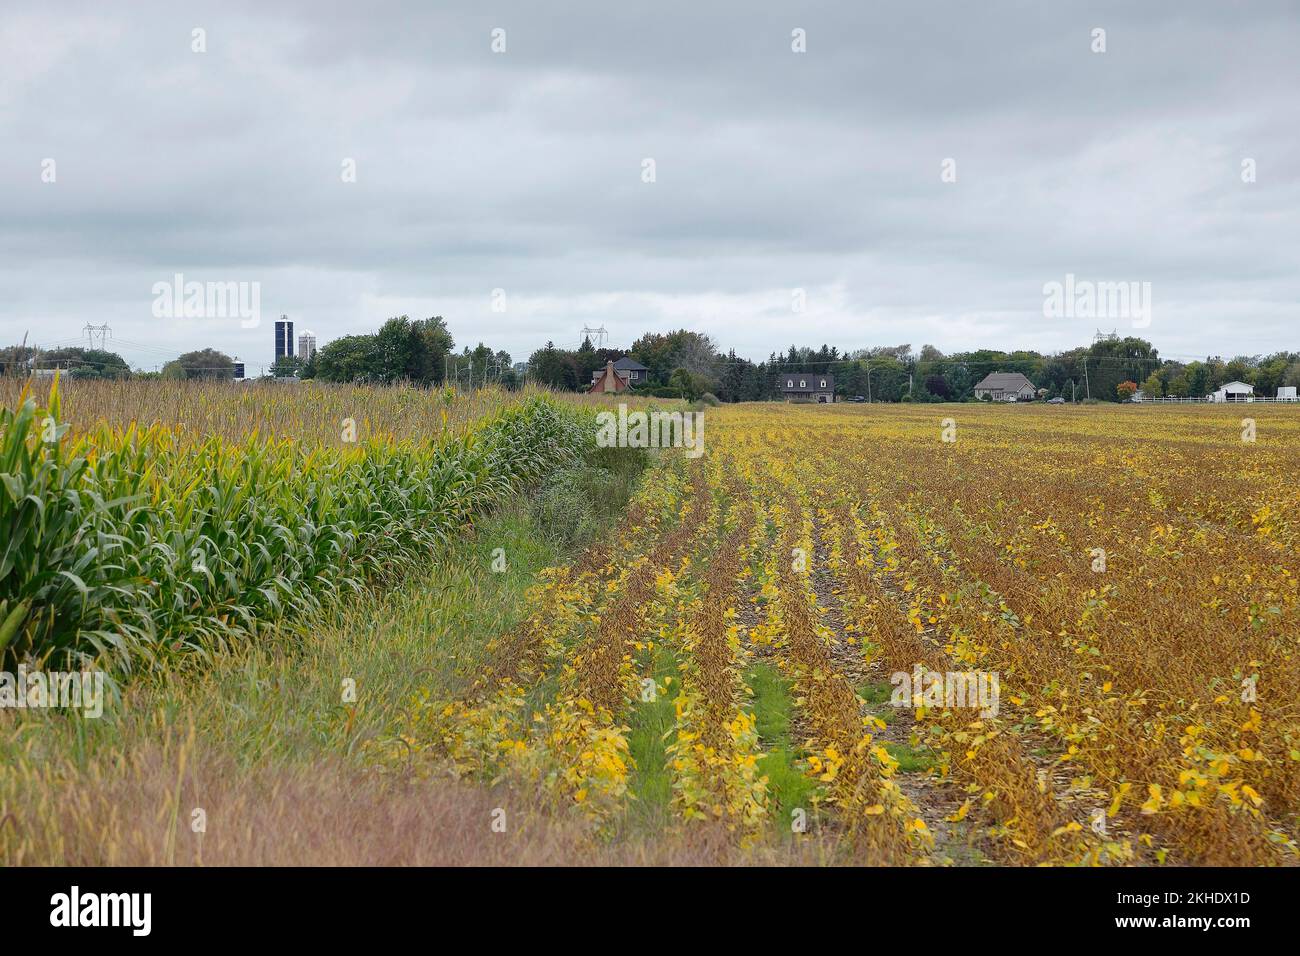 Agriculture, corn and soy field, Province of Quebec, Canada, North America Stock Photo